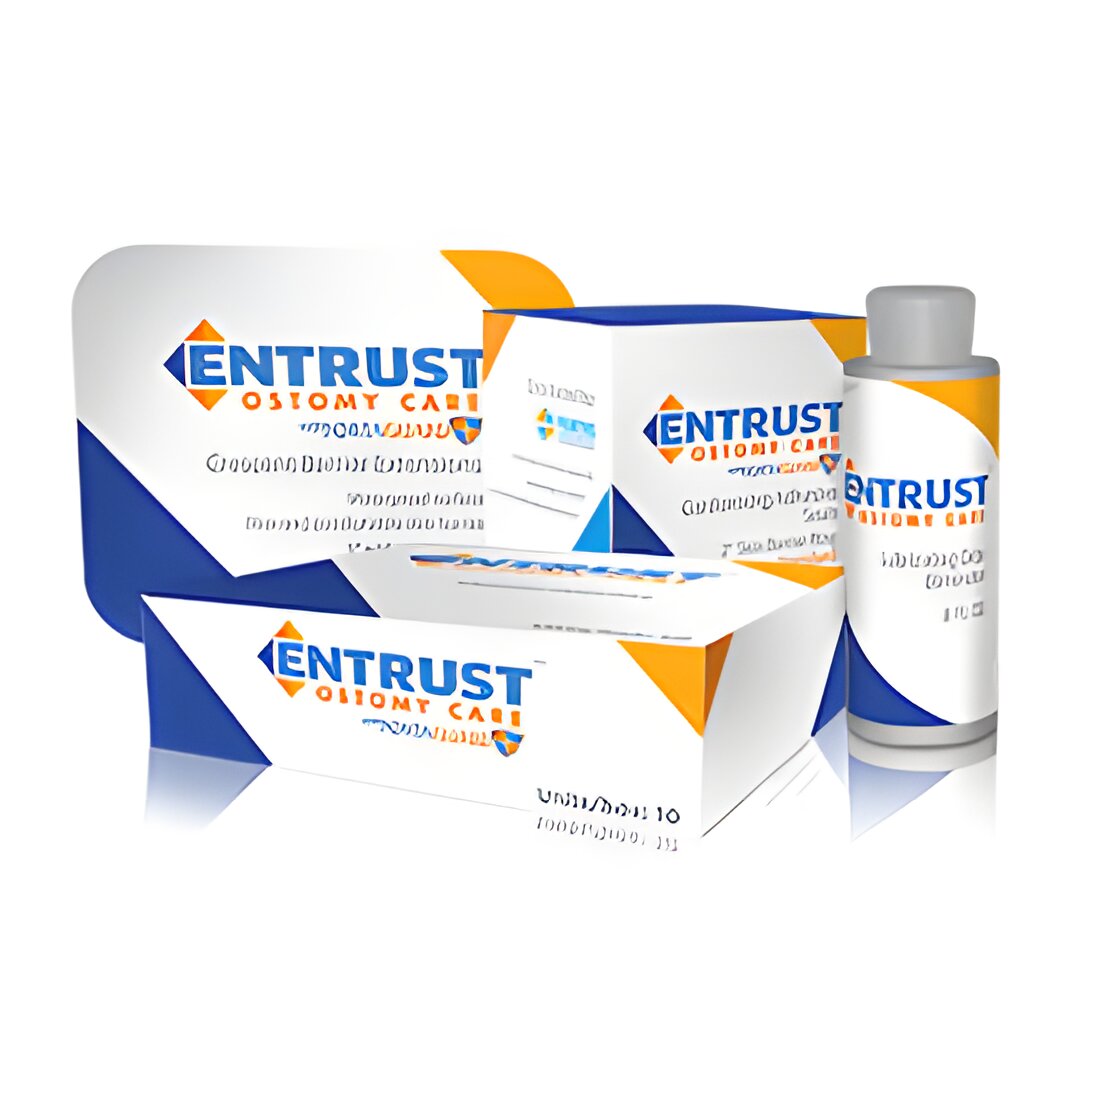 Free Samples Of Entrust Ostomy Care Products